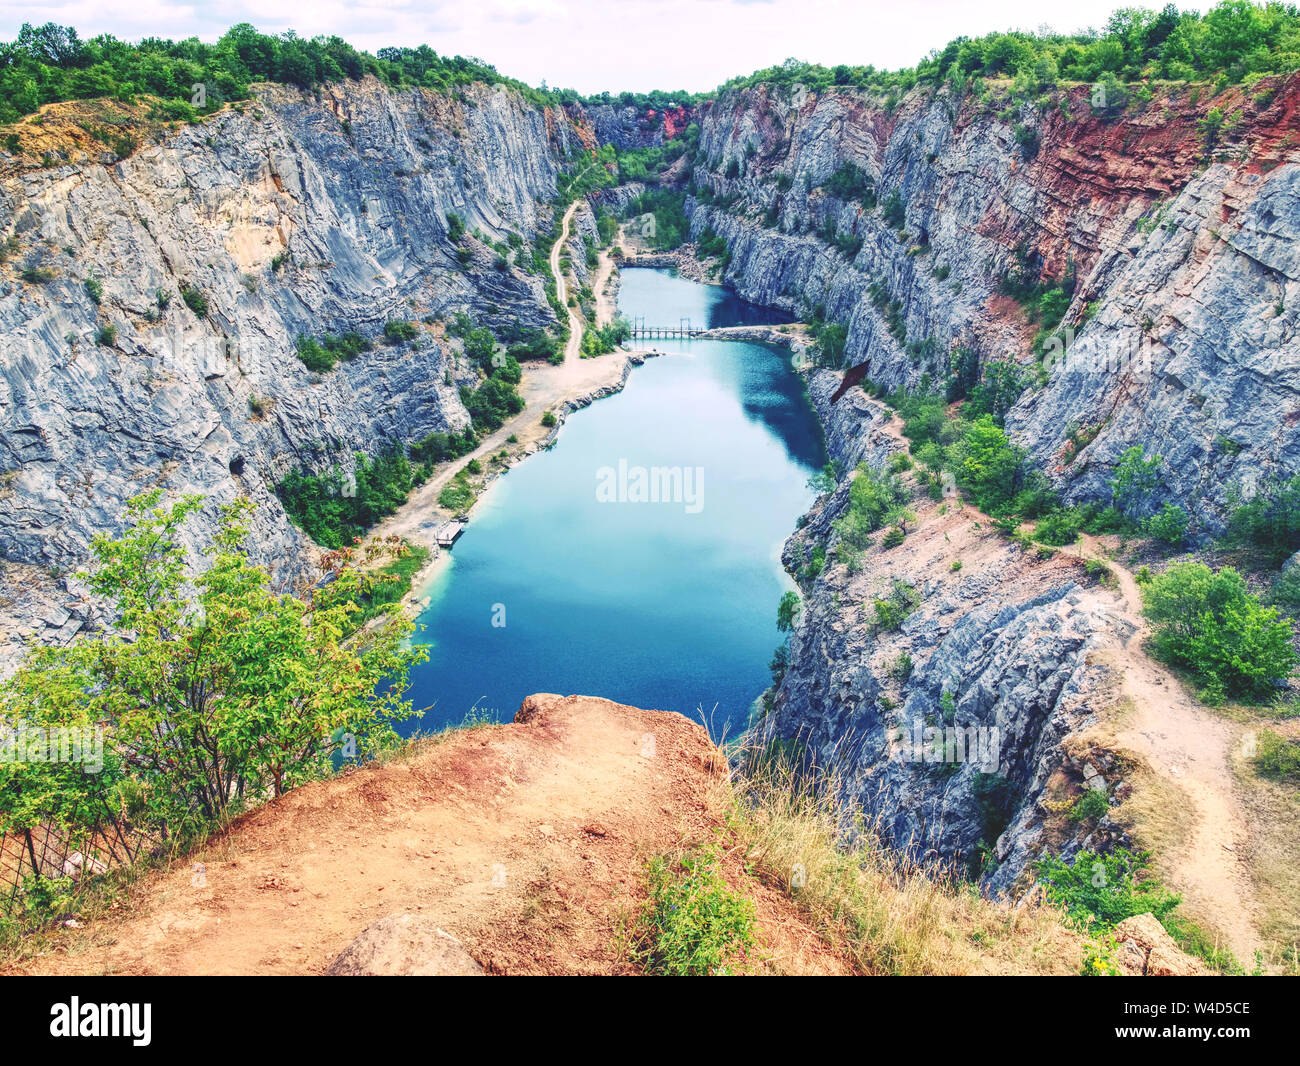 Velka Amerika is abandoned dolomite quarry for cement production. Czech Republic, Europe. Stock Photo